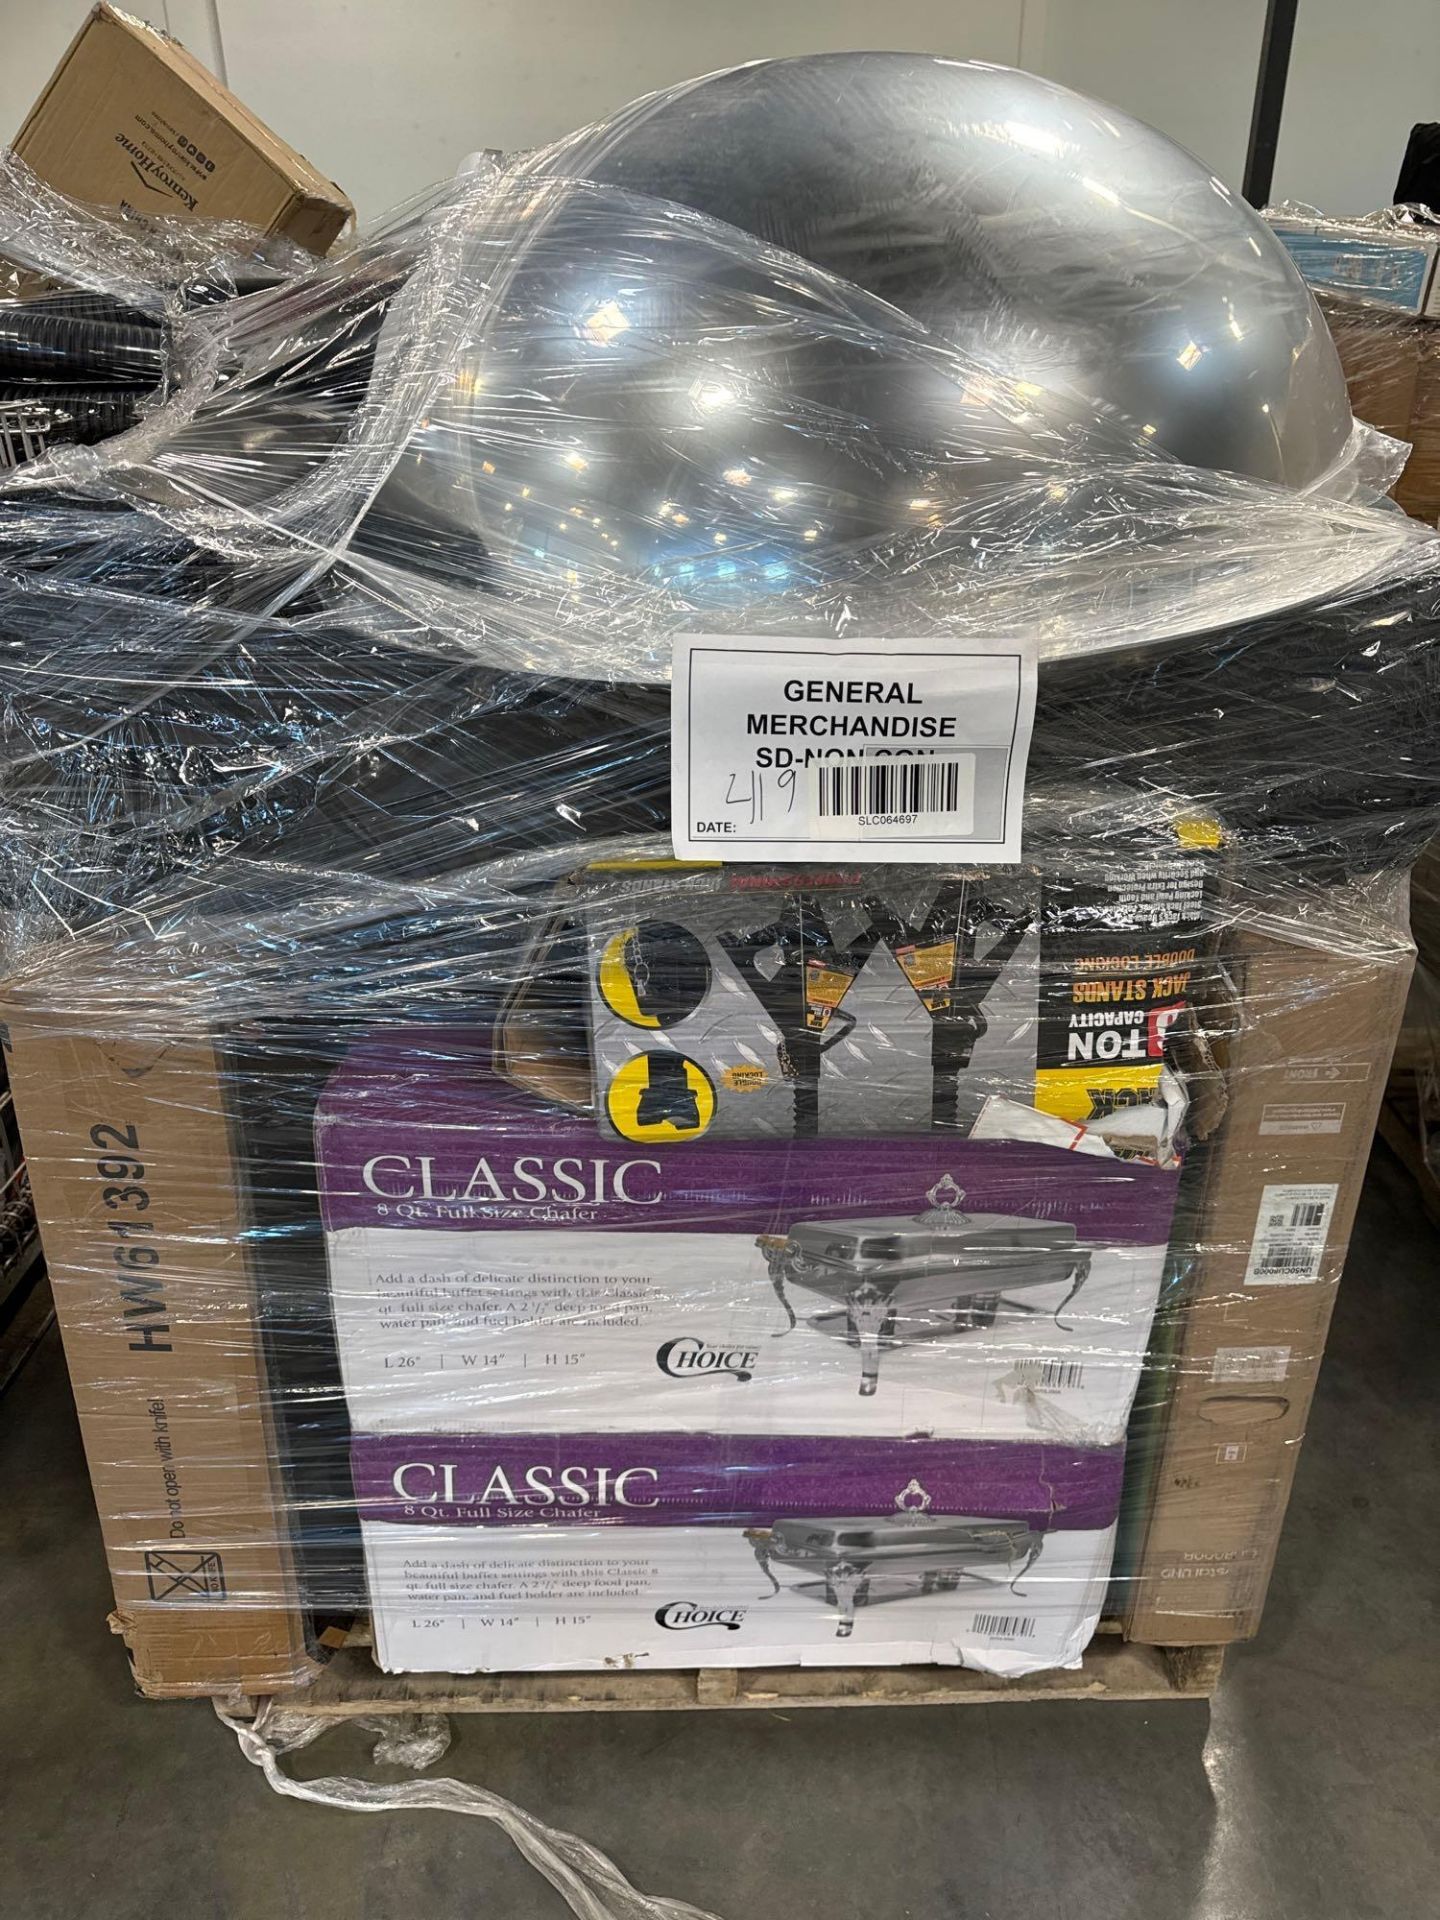 two 8-quart chafing dishes jacks Samsung Crystal TV and more